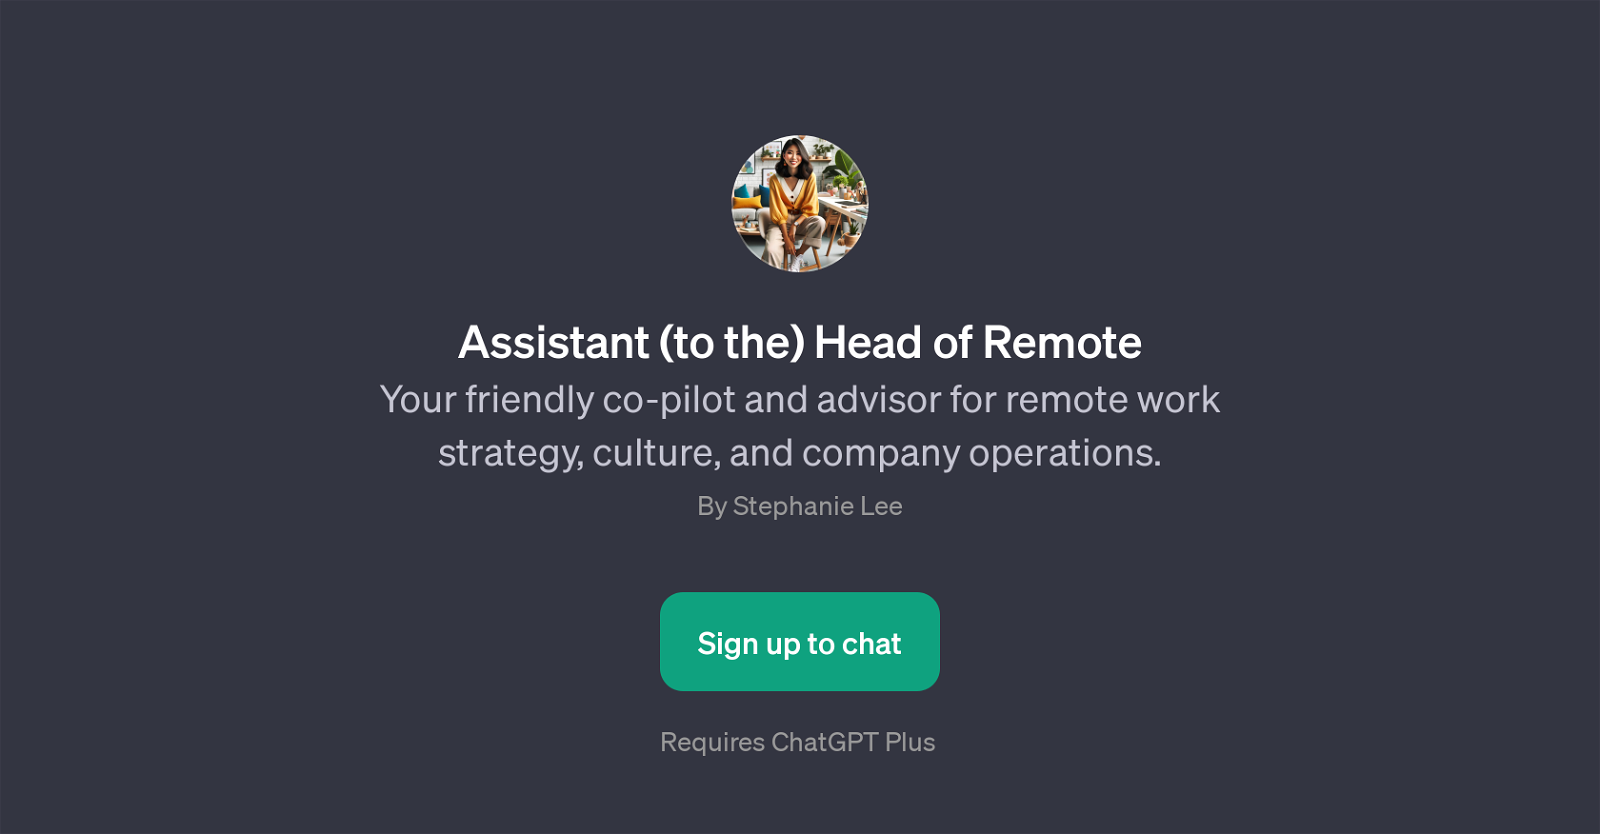 Assistant (to the) Head of Remote website